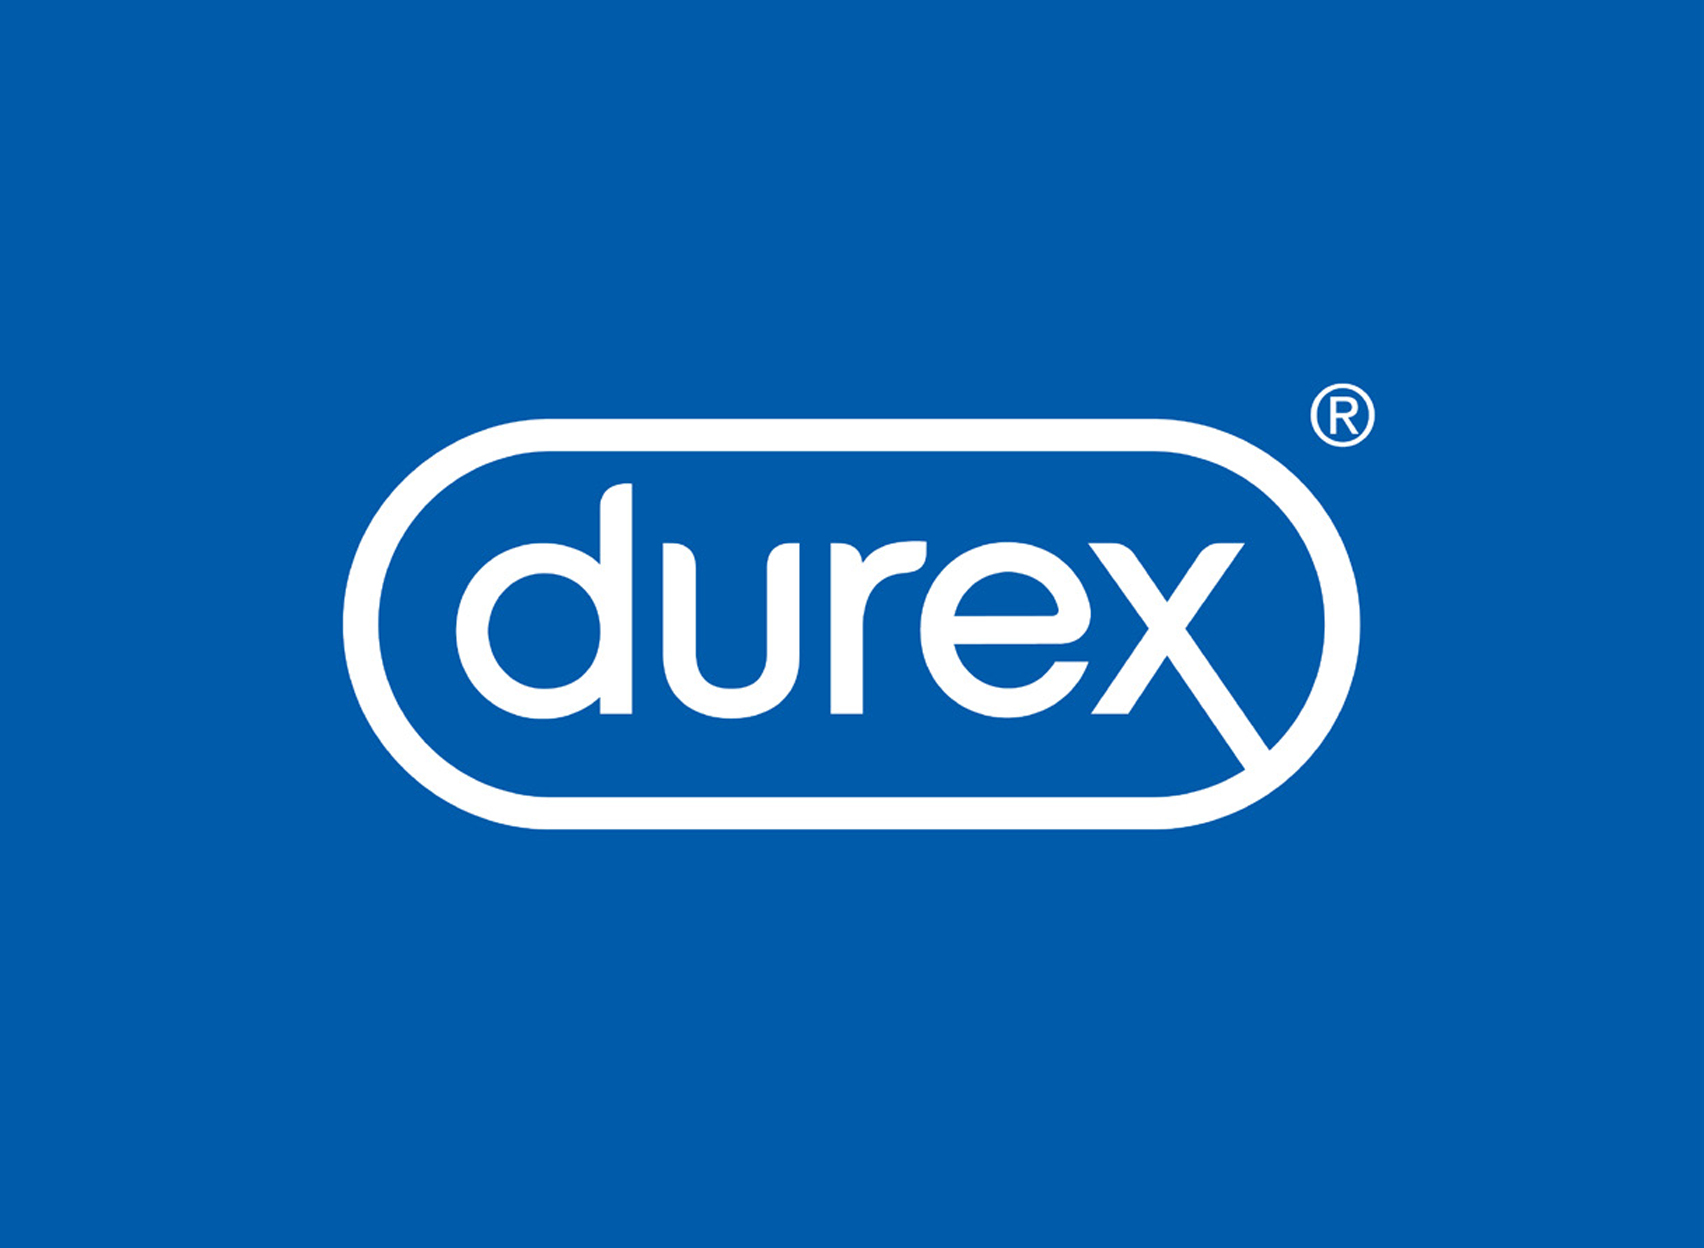 Durex Rebrands With Flat Logo And Sex Positive Campaign Brandknewmagactionable Intelligence